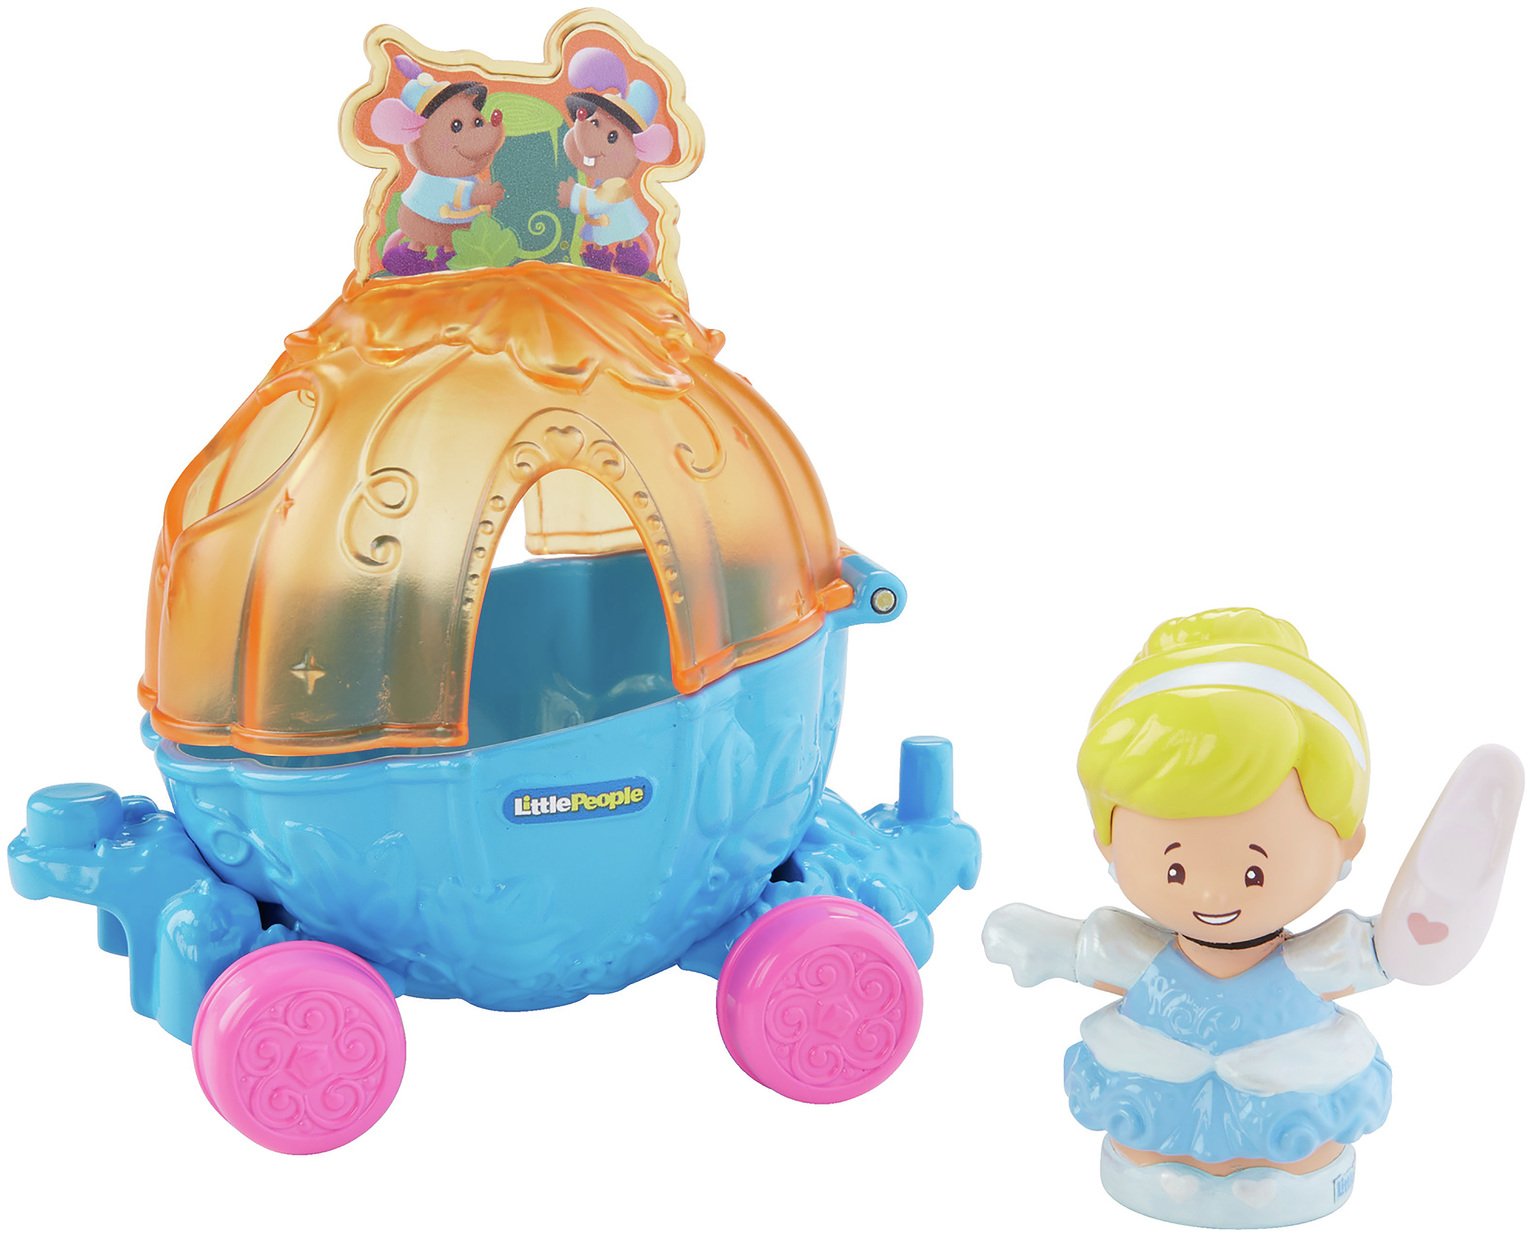 fisher price little people princess carriage